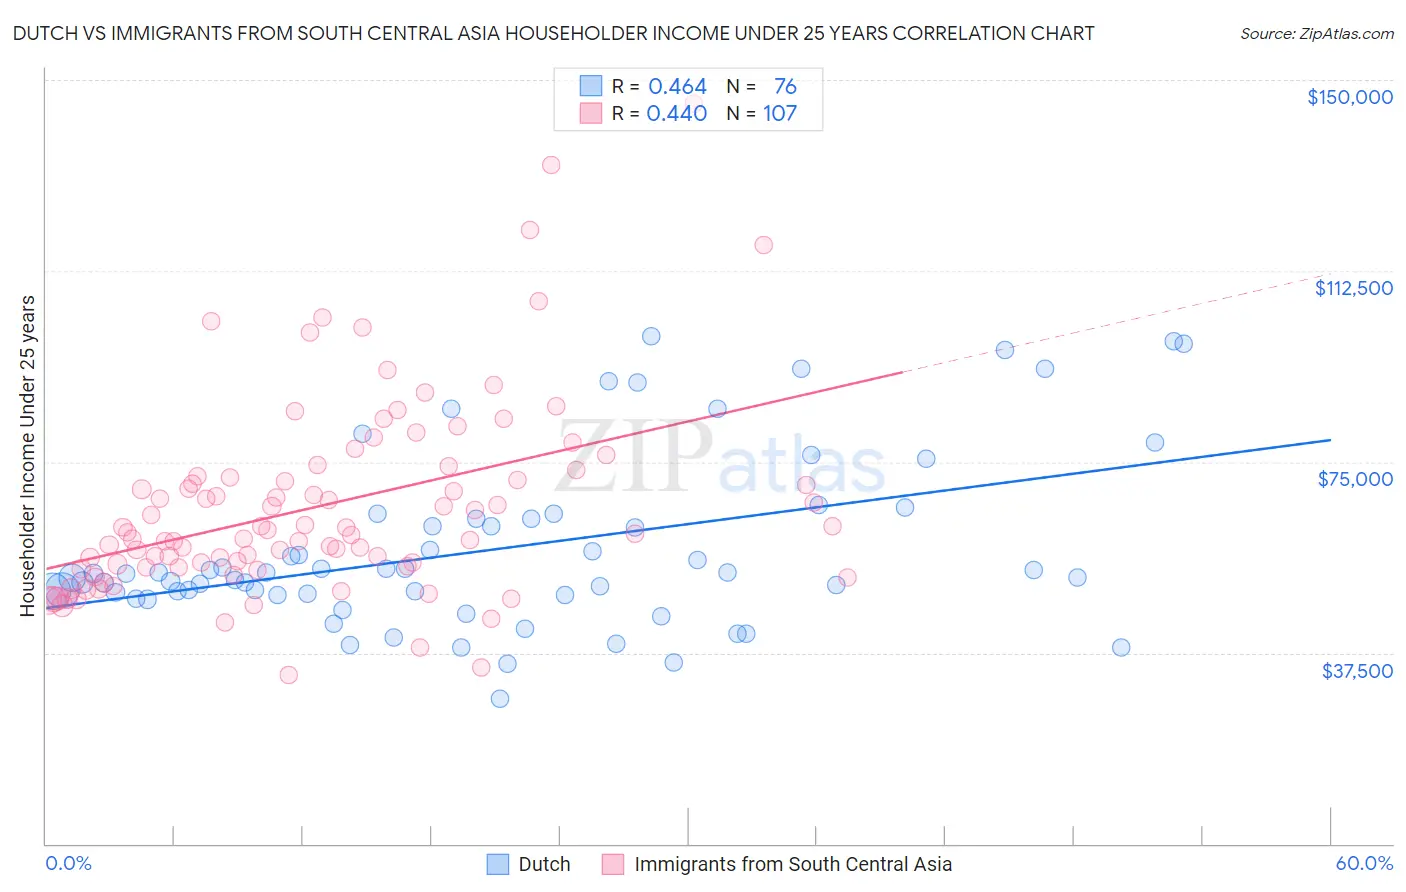 Dutch vs Immigrants from South Central Asia Householder Income Under 25 years